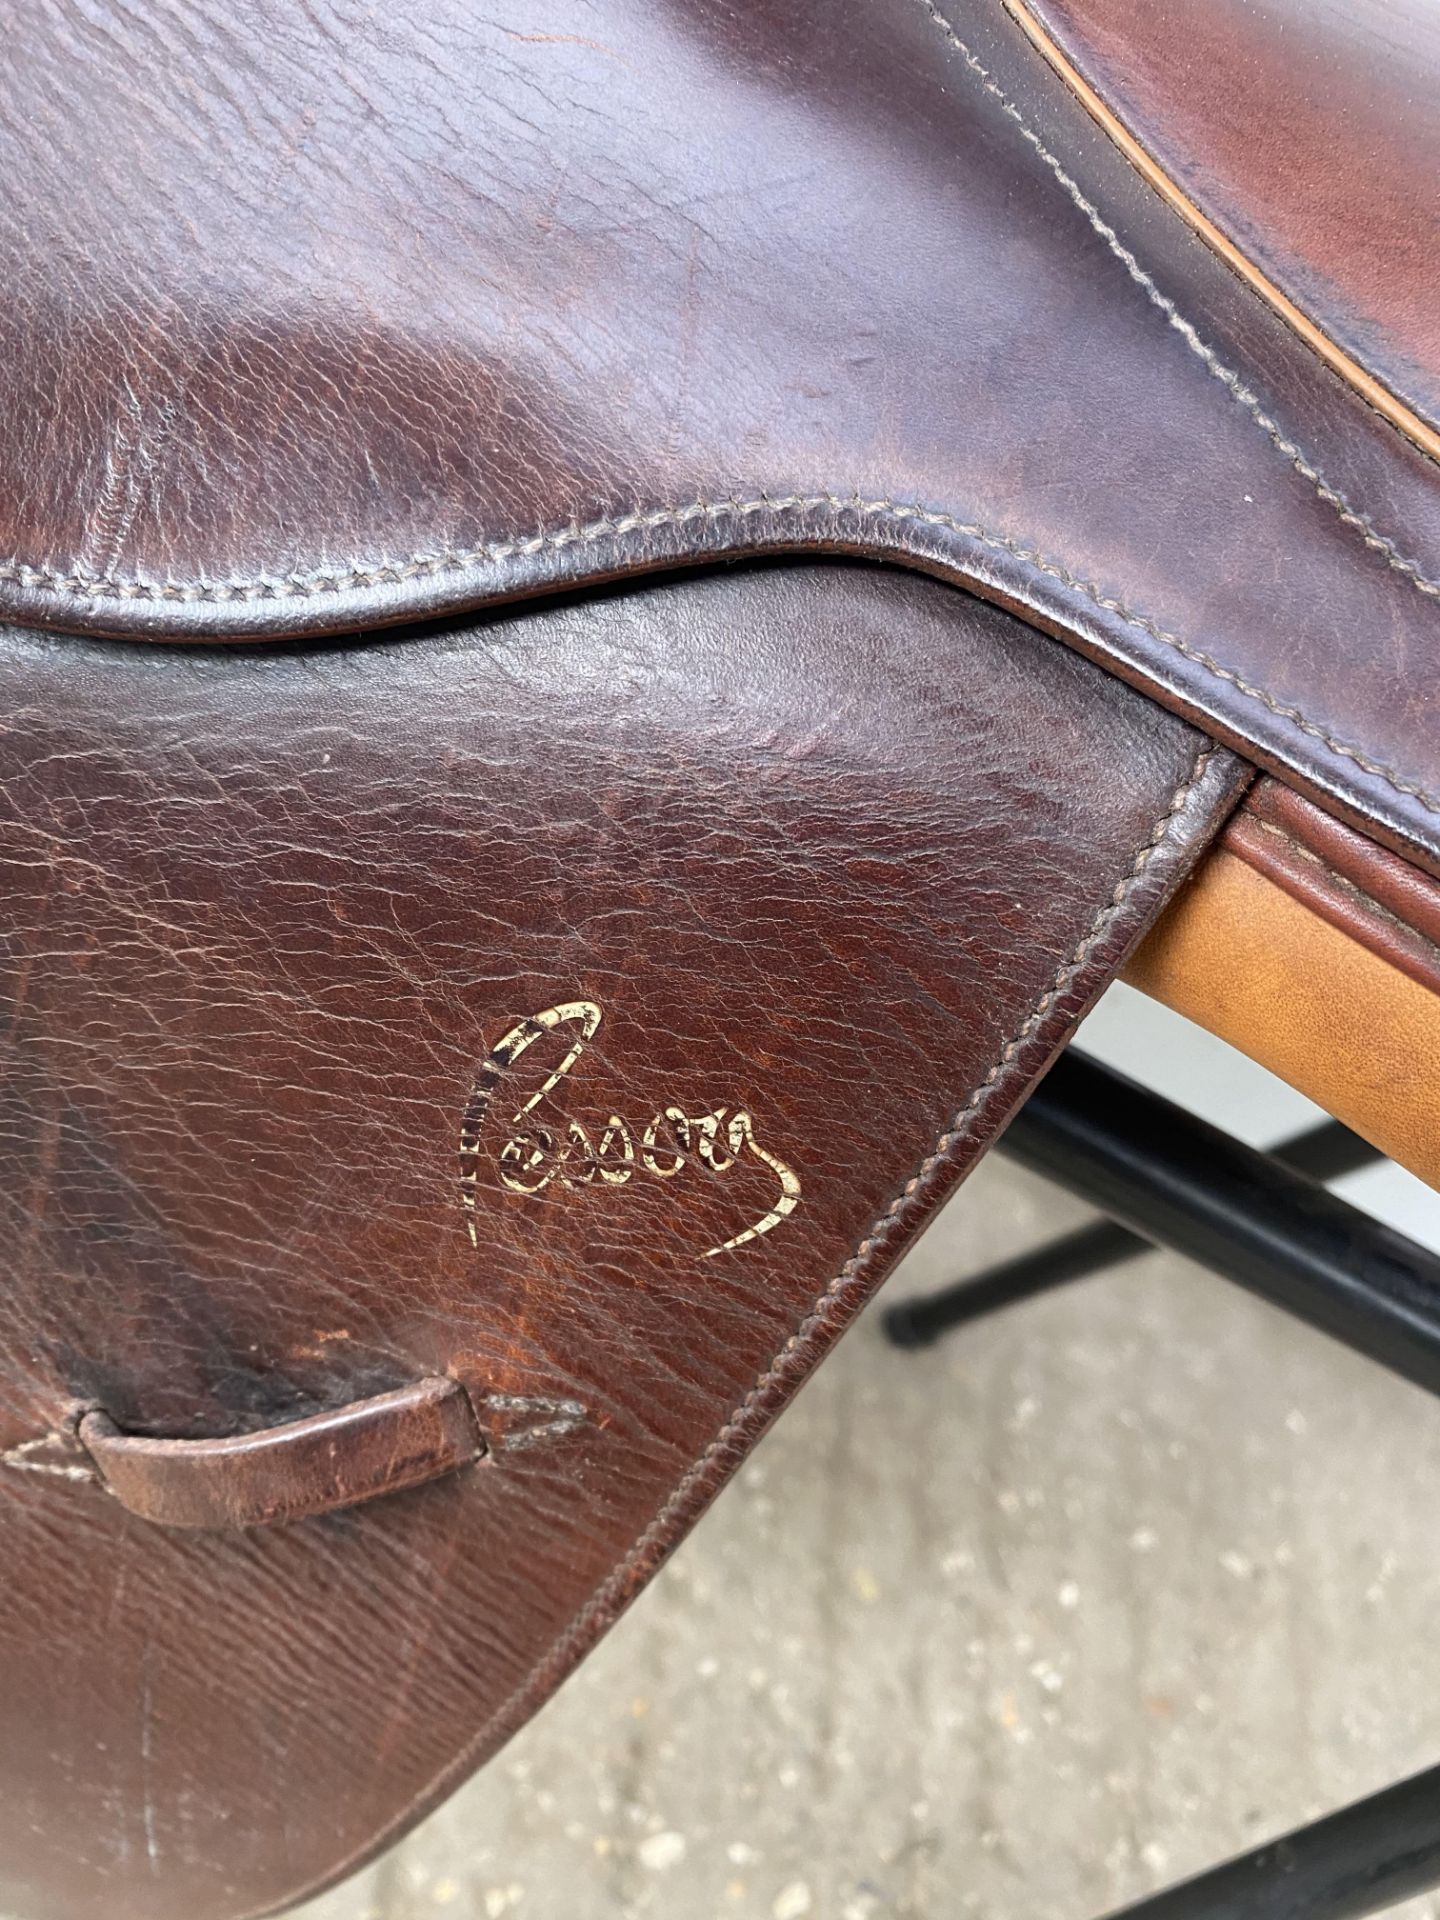 Brown leather GP saddle by Pesoa of Paris 17.5" - Image 2 of 2